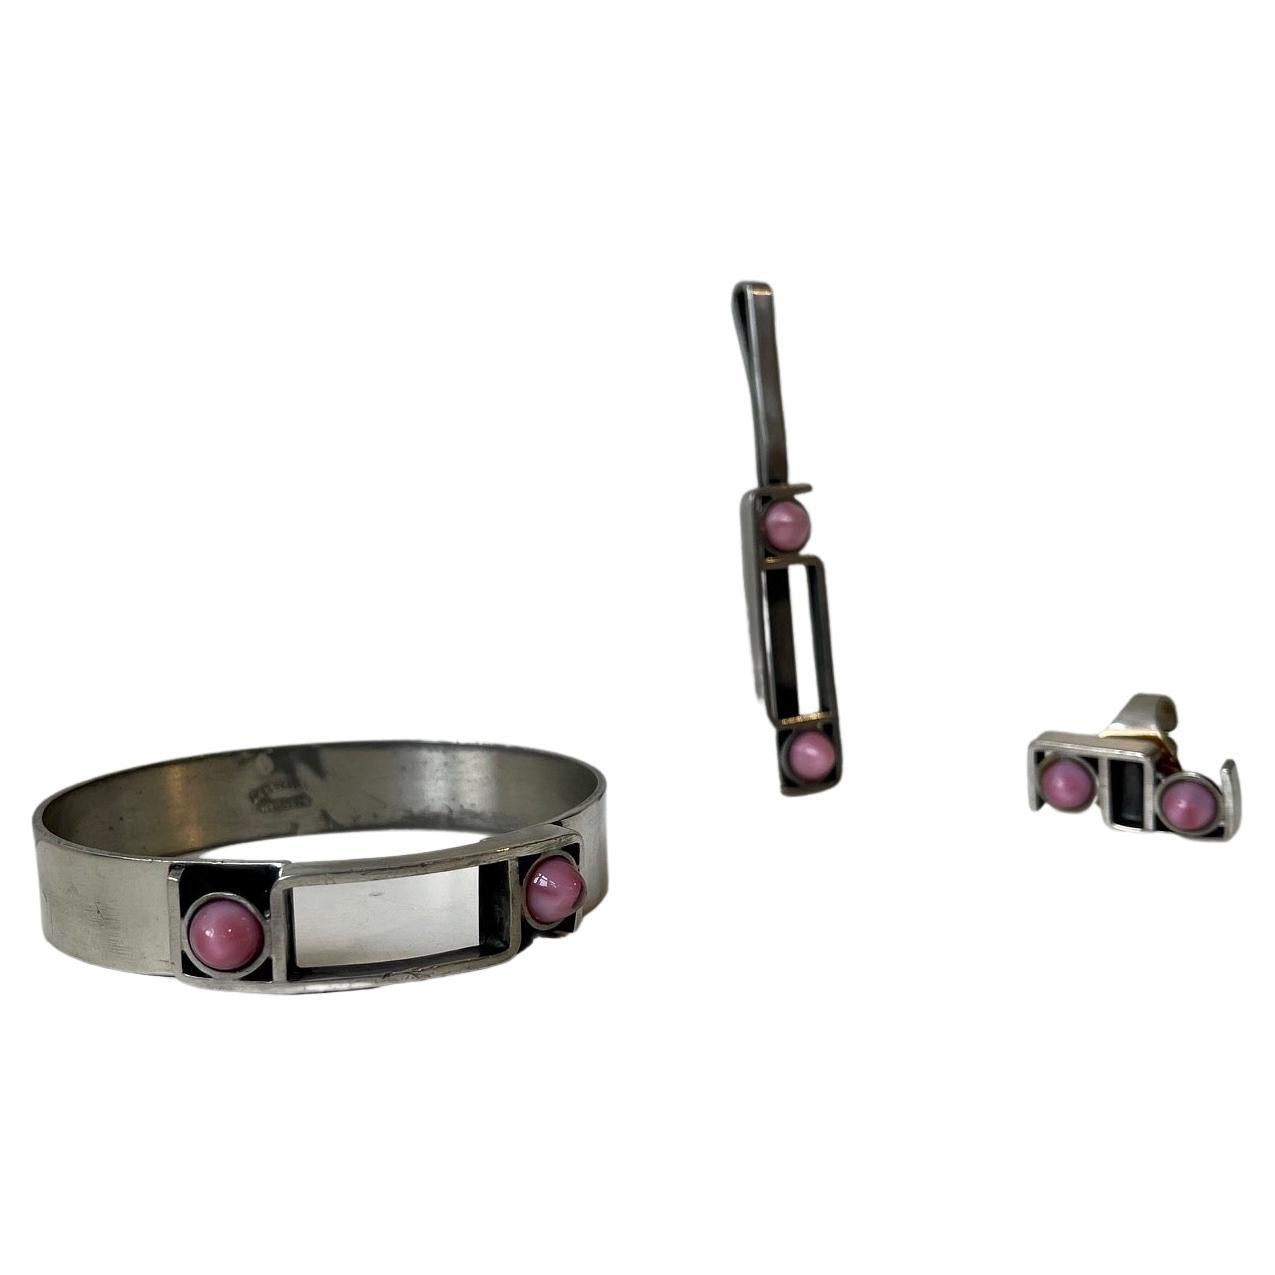 Danish Modernist Ring, Pendant & Armring in Pewter & Pink Stones, 1970s For Sale